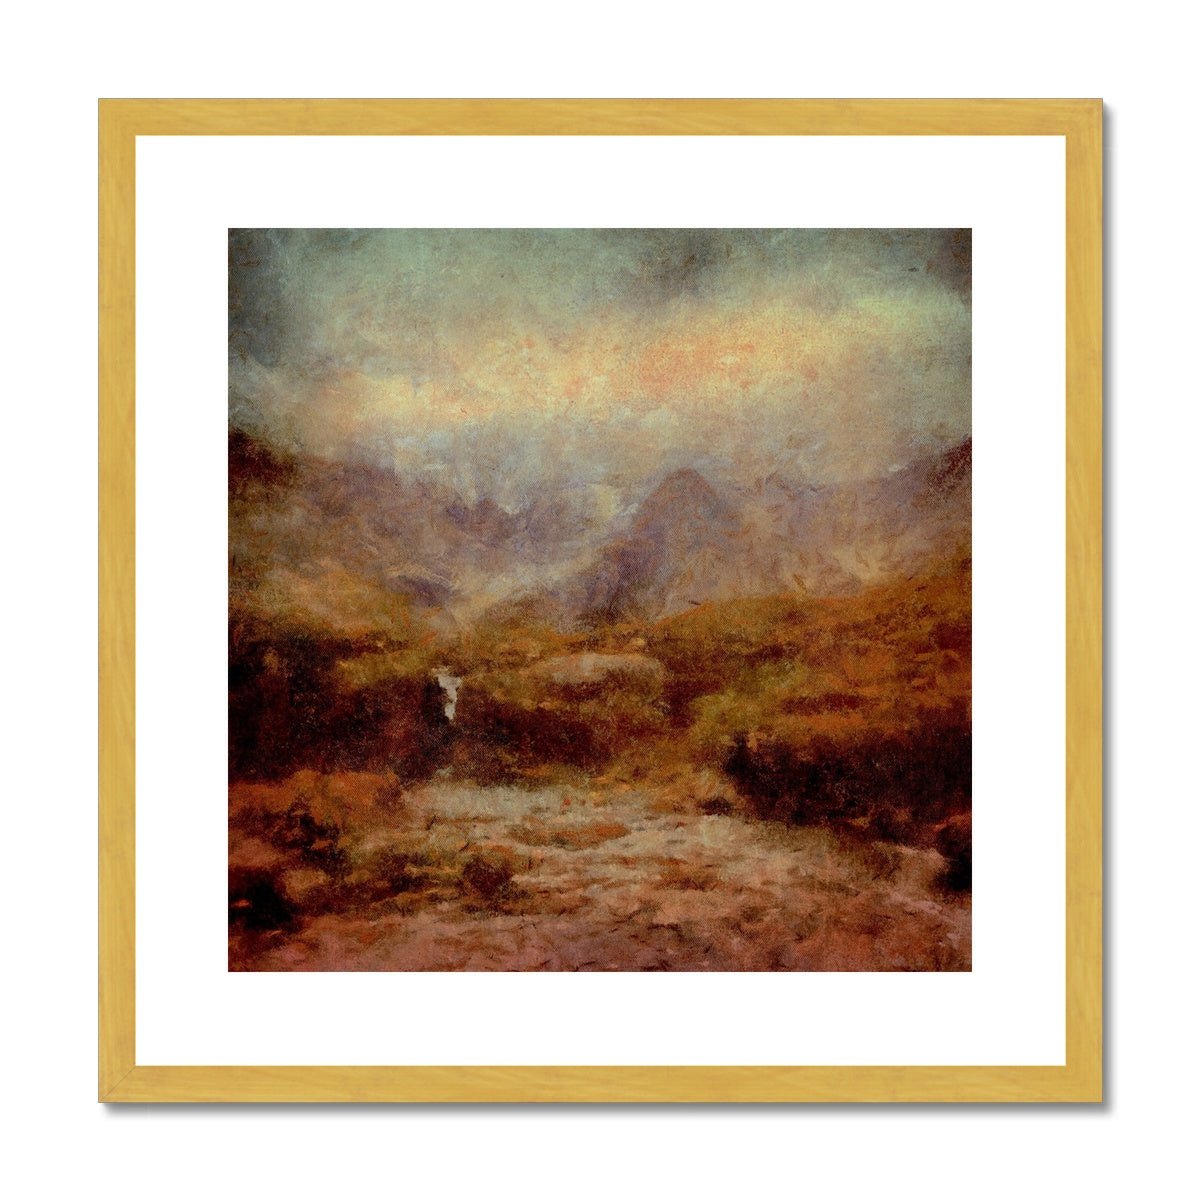 The Brooding Fairy Pools Skye Painting | Antique Framed & Mounted Prints From Scotland-Antique Framed & Mounted Prints-Skye Art Gallery-20"x20"-Gold Frame-Paintings, Prints, Homeware, Art Gifts From Scotland By Scottish Artist Kevin Hunter